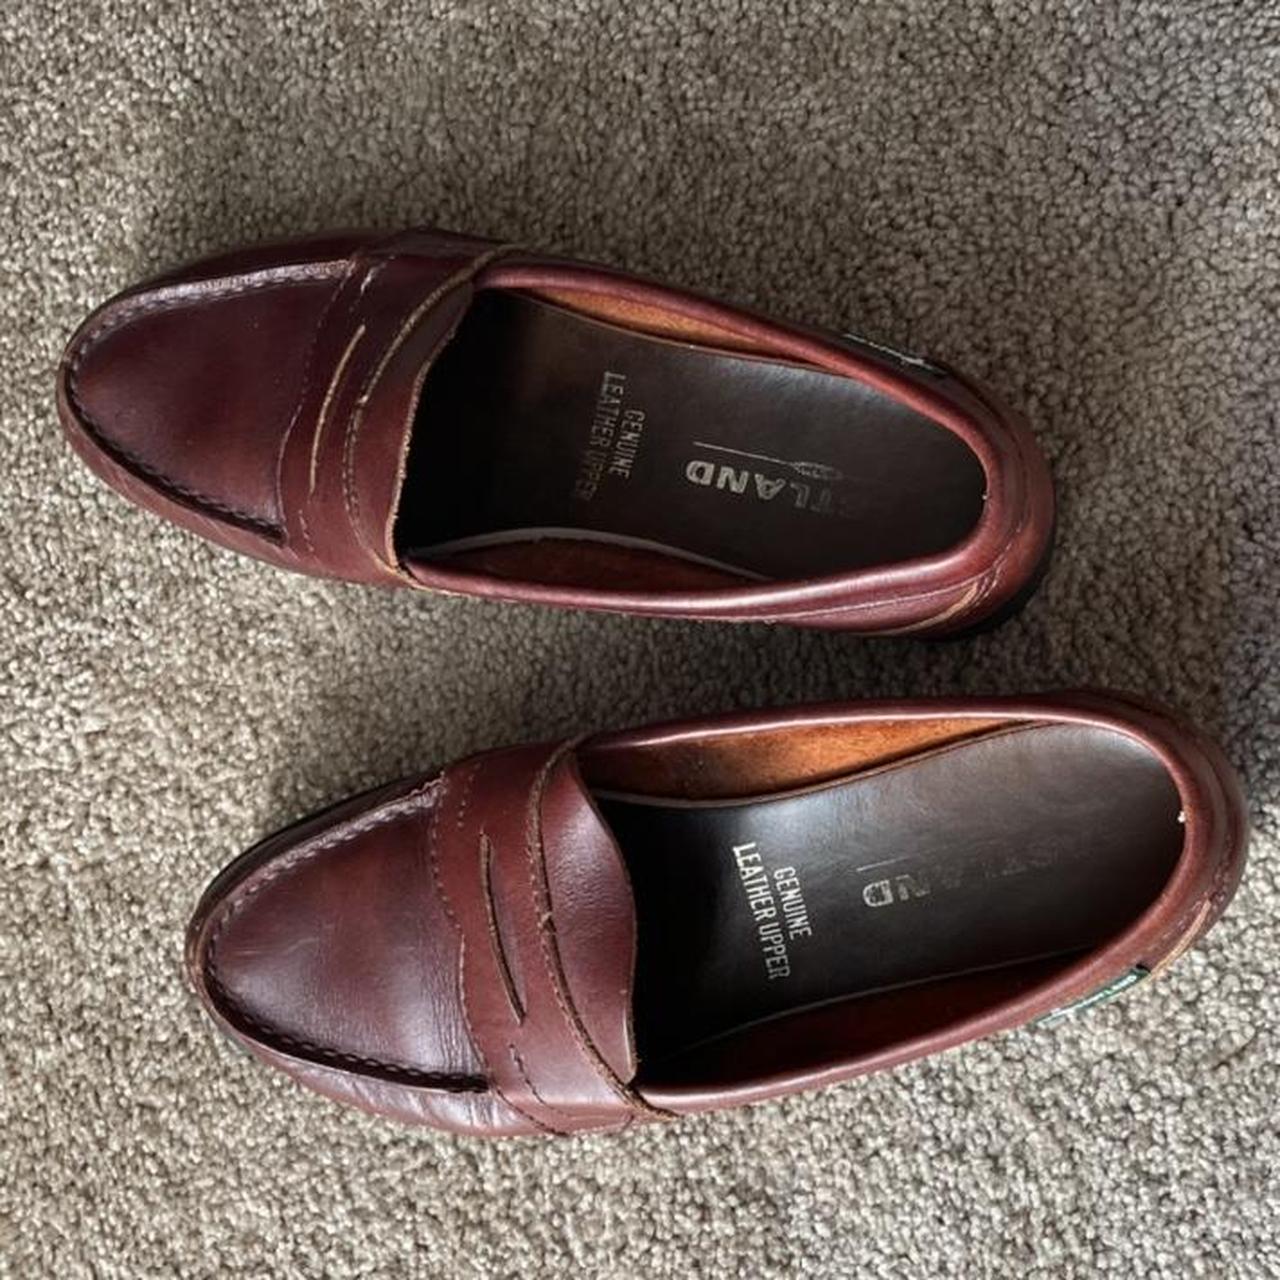 Eastland Women's Brown and Burgundy Loafers (2)